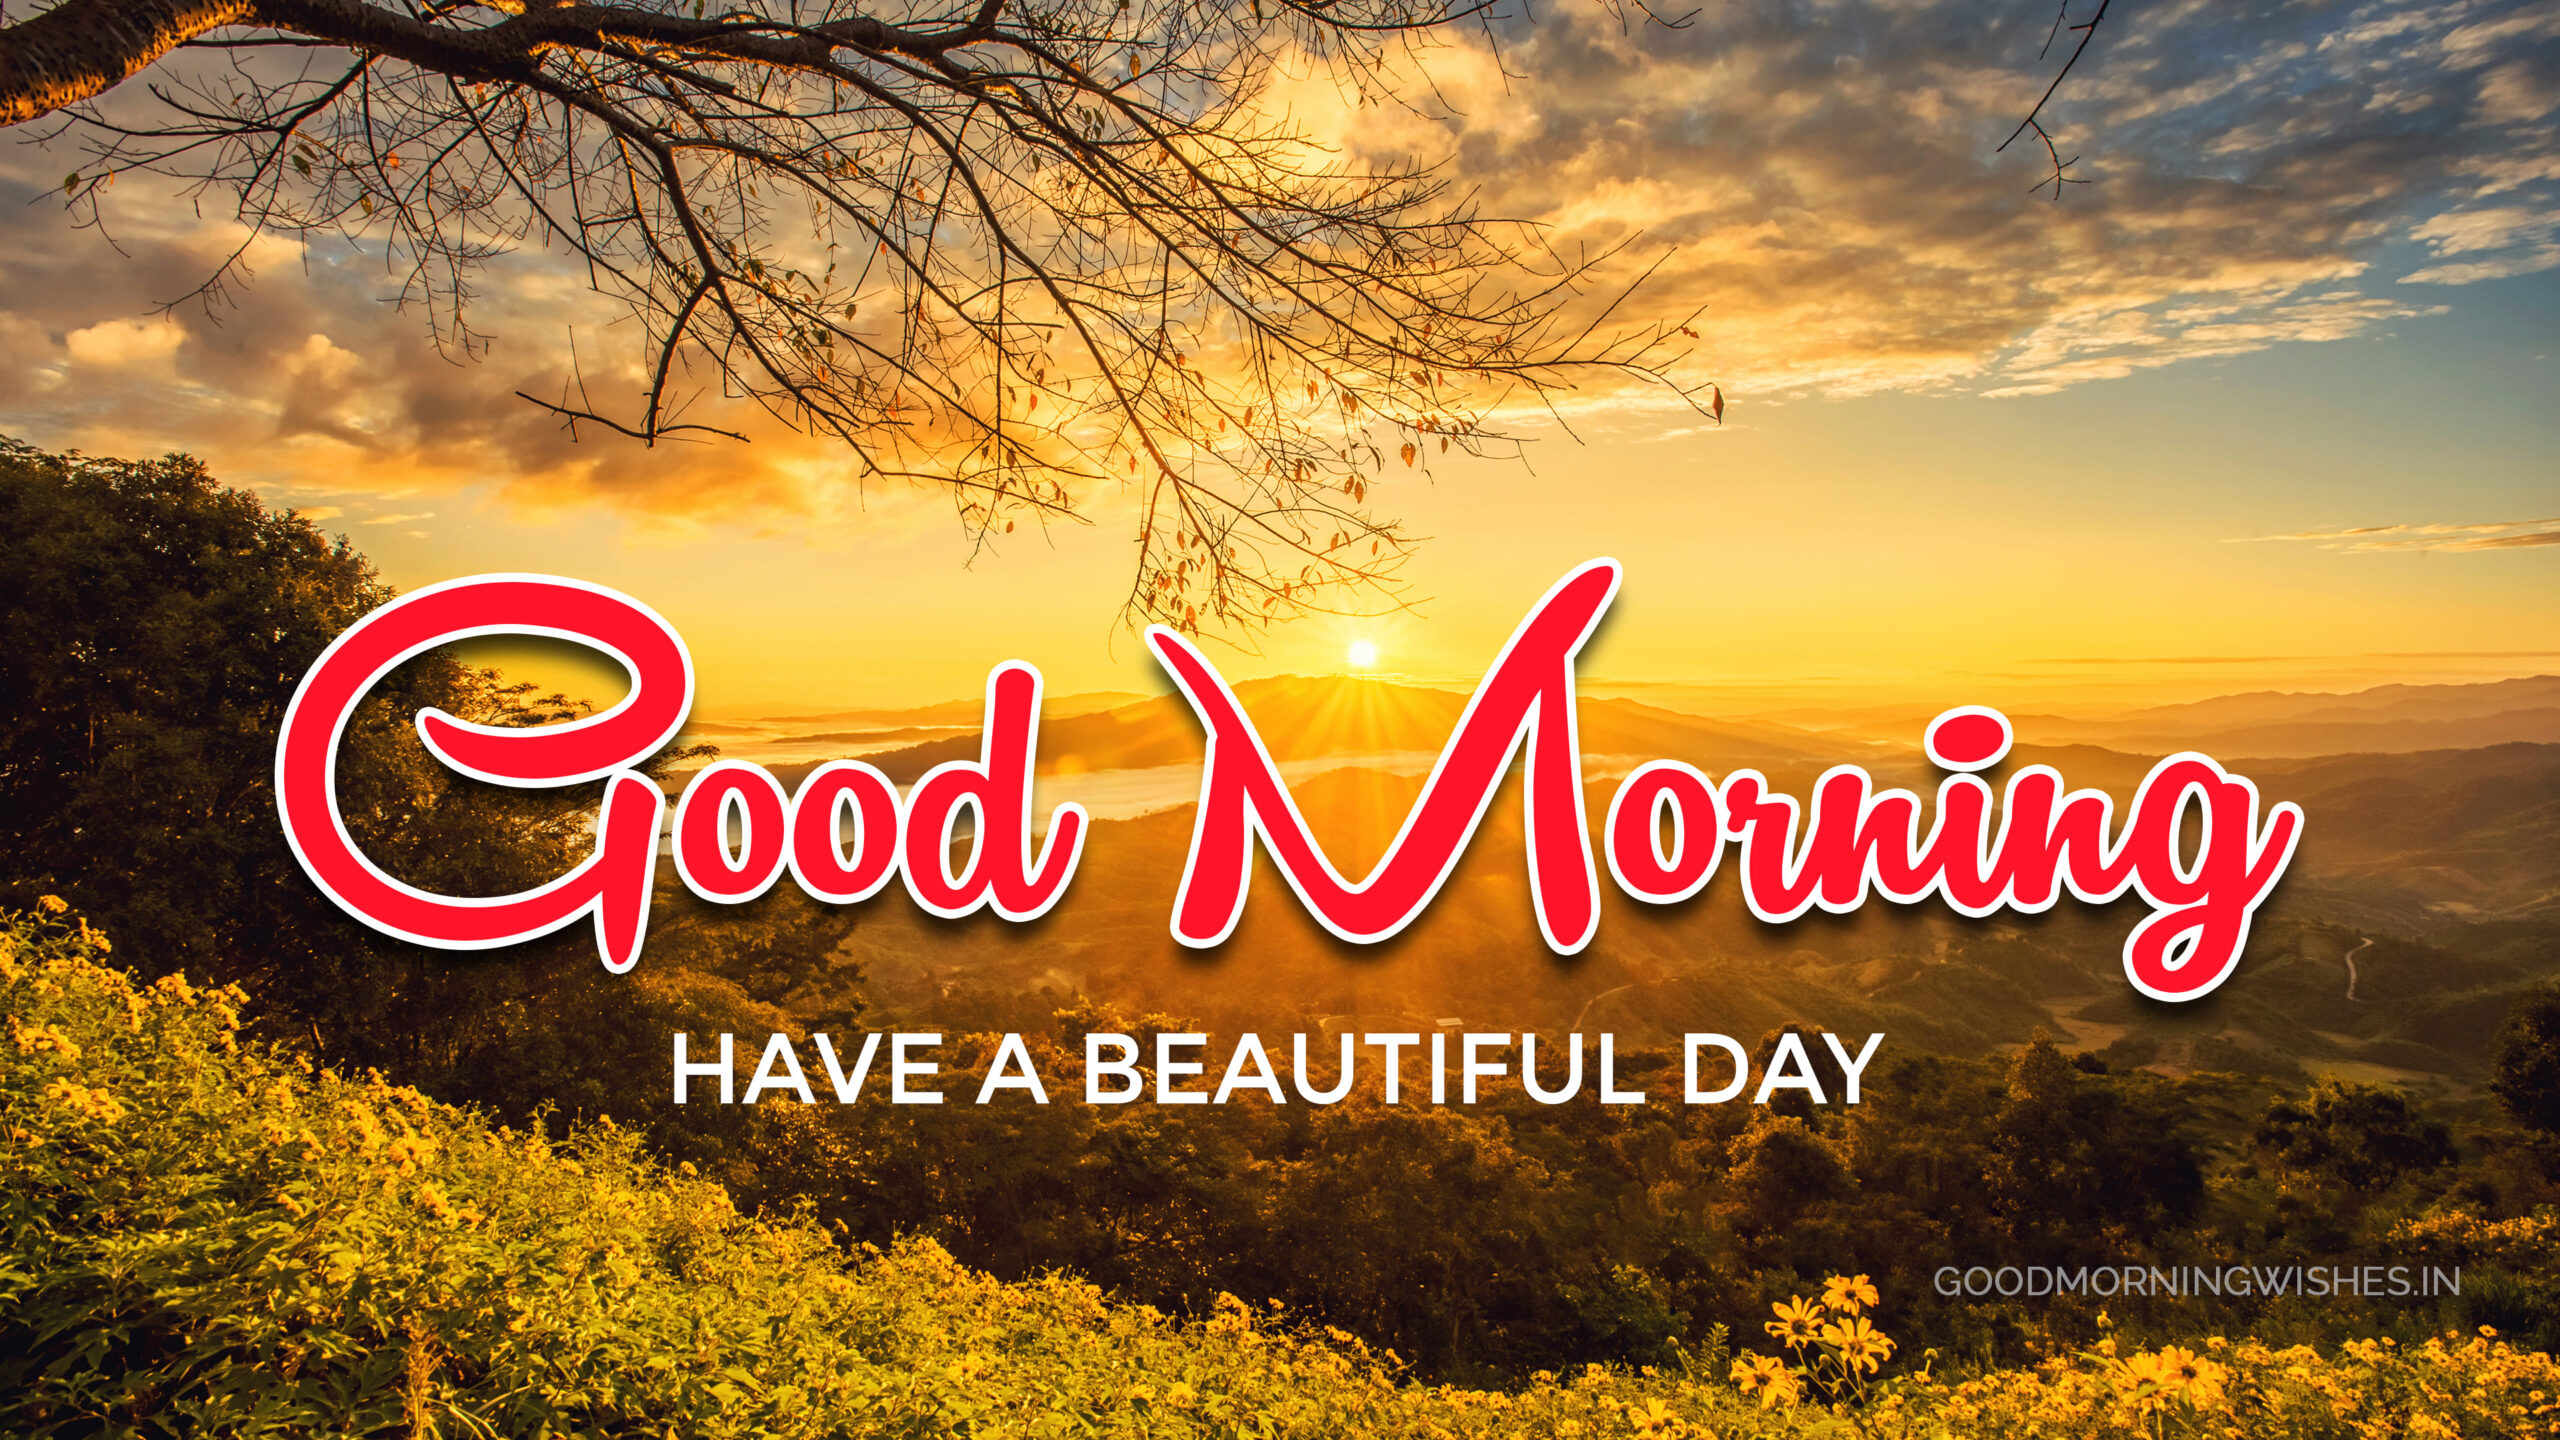 Goodmorning 4K wallpapers for your desktop or mobile screen free and easy  to download